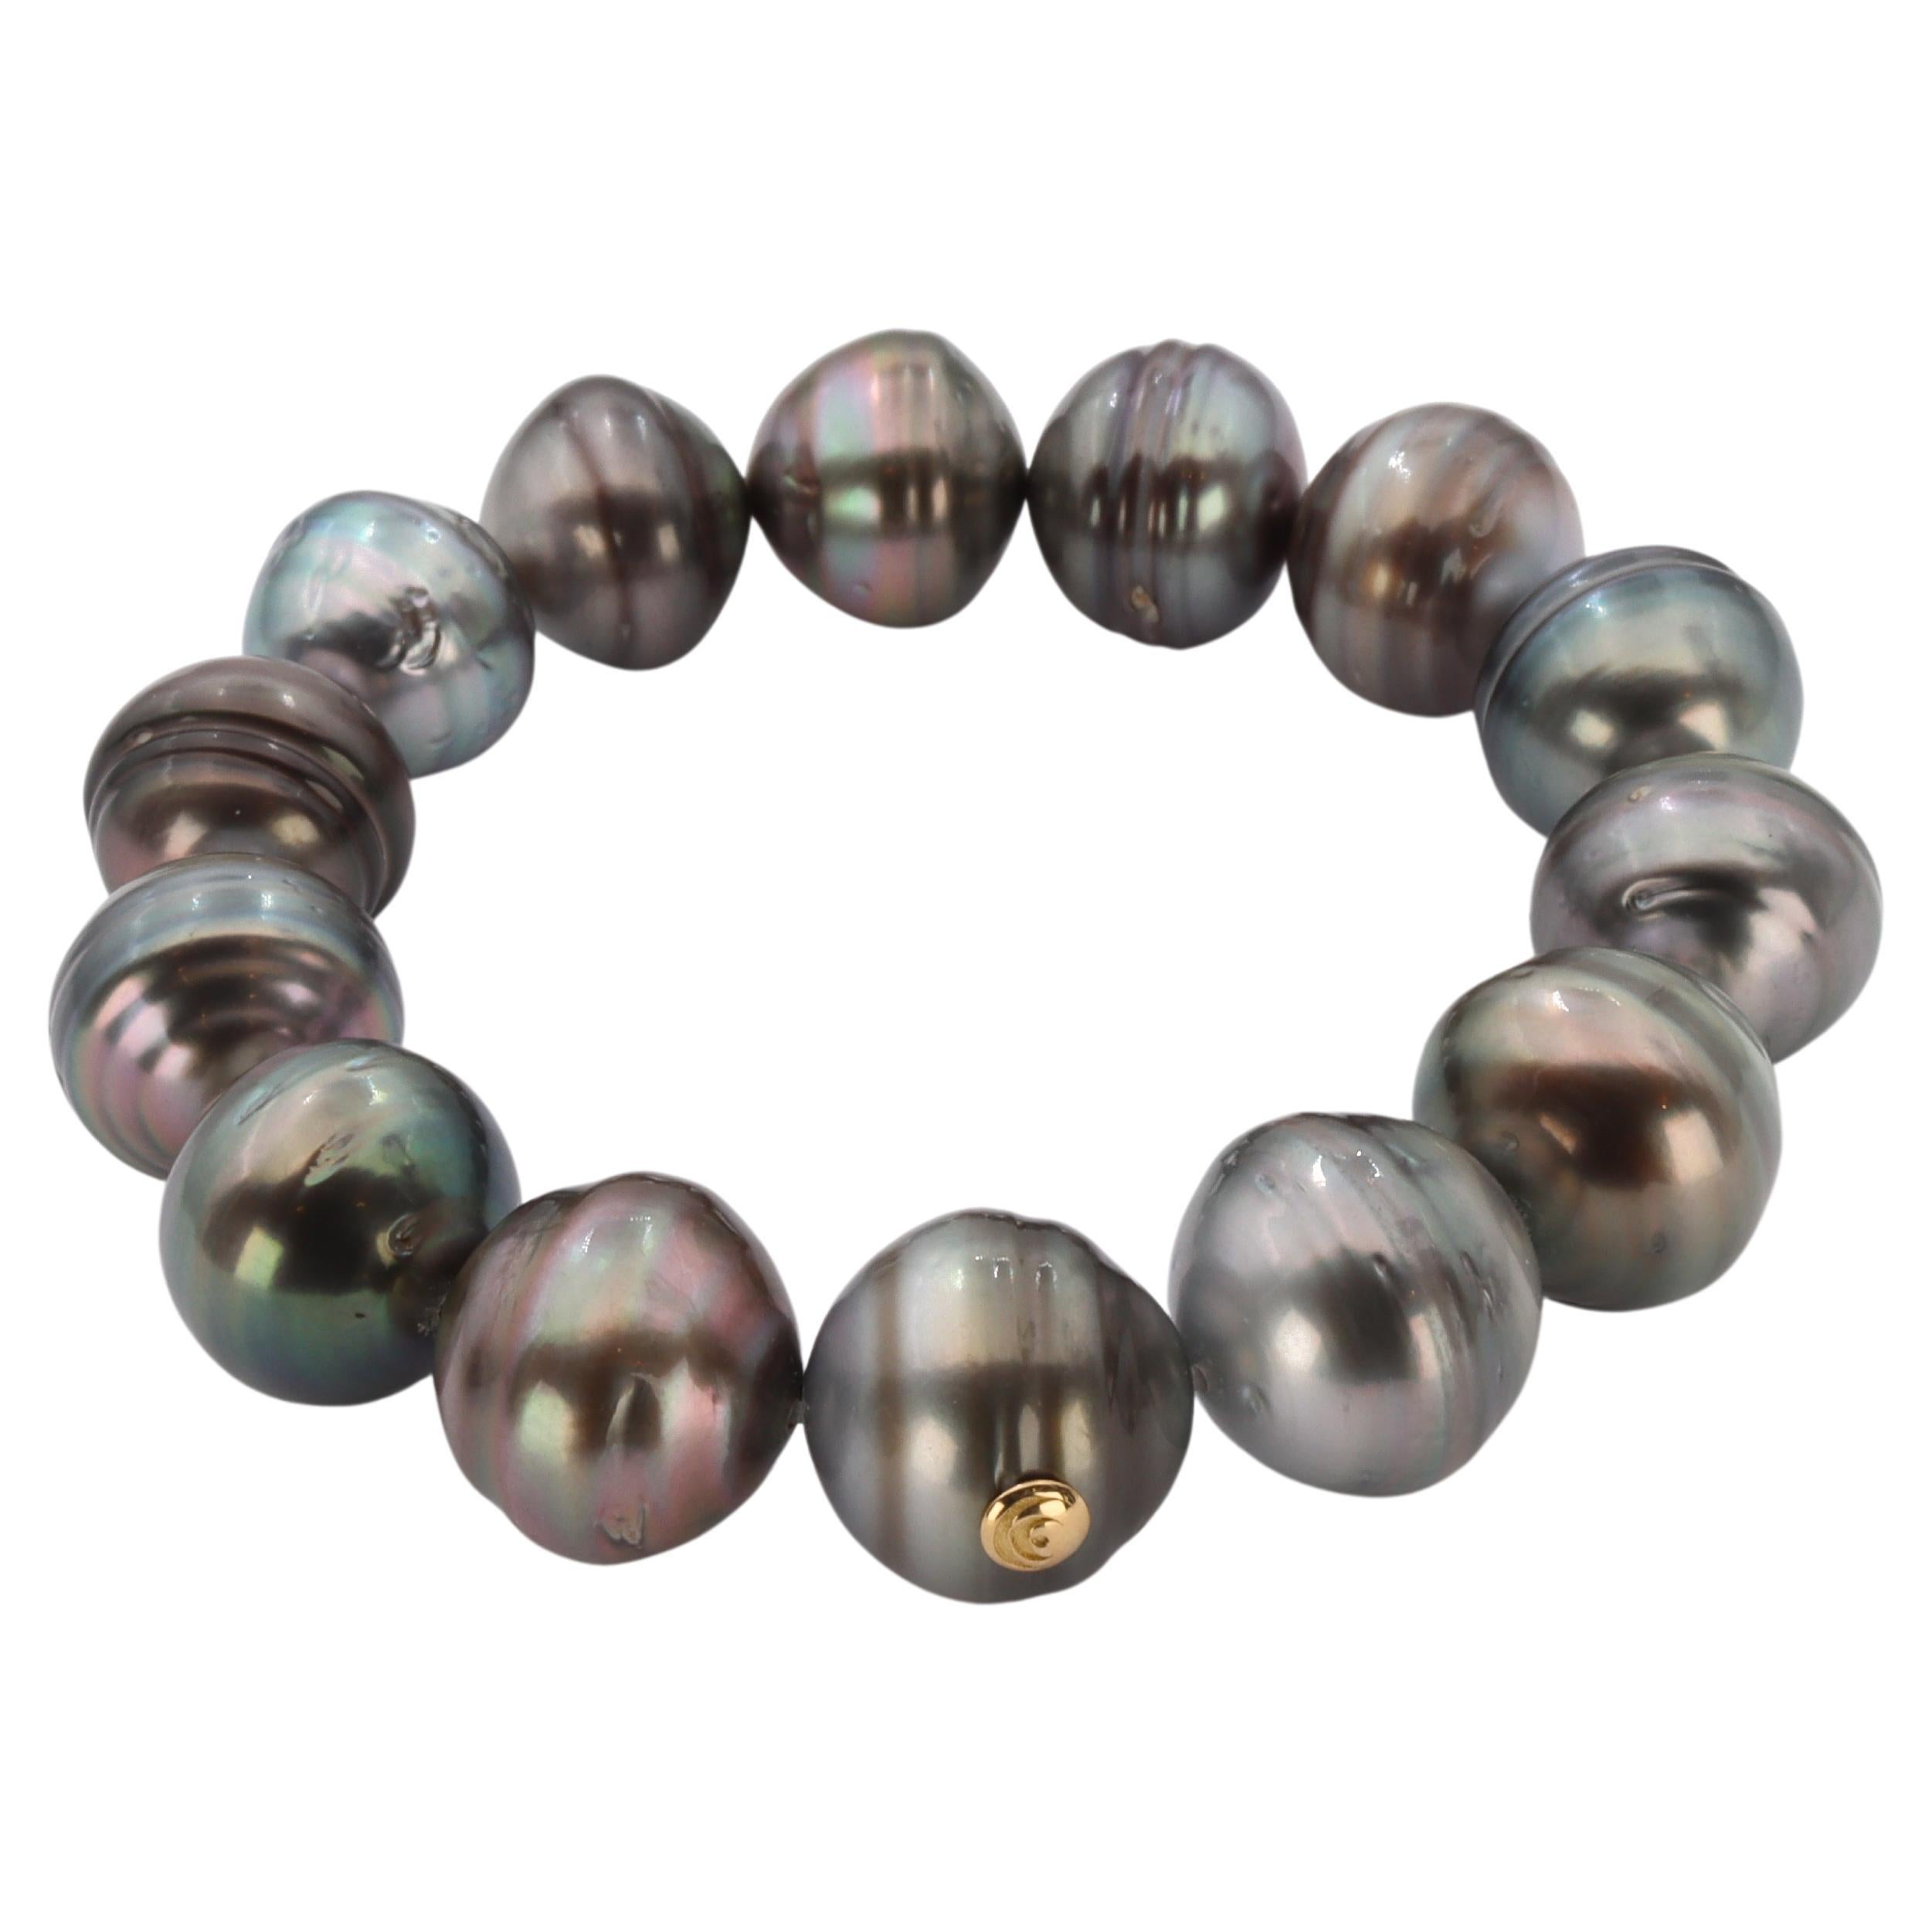 Aventina-Spencer / Marc'Harit Conscious Large Circled Tahitian Pearl Bracelet For Sale